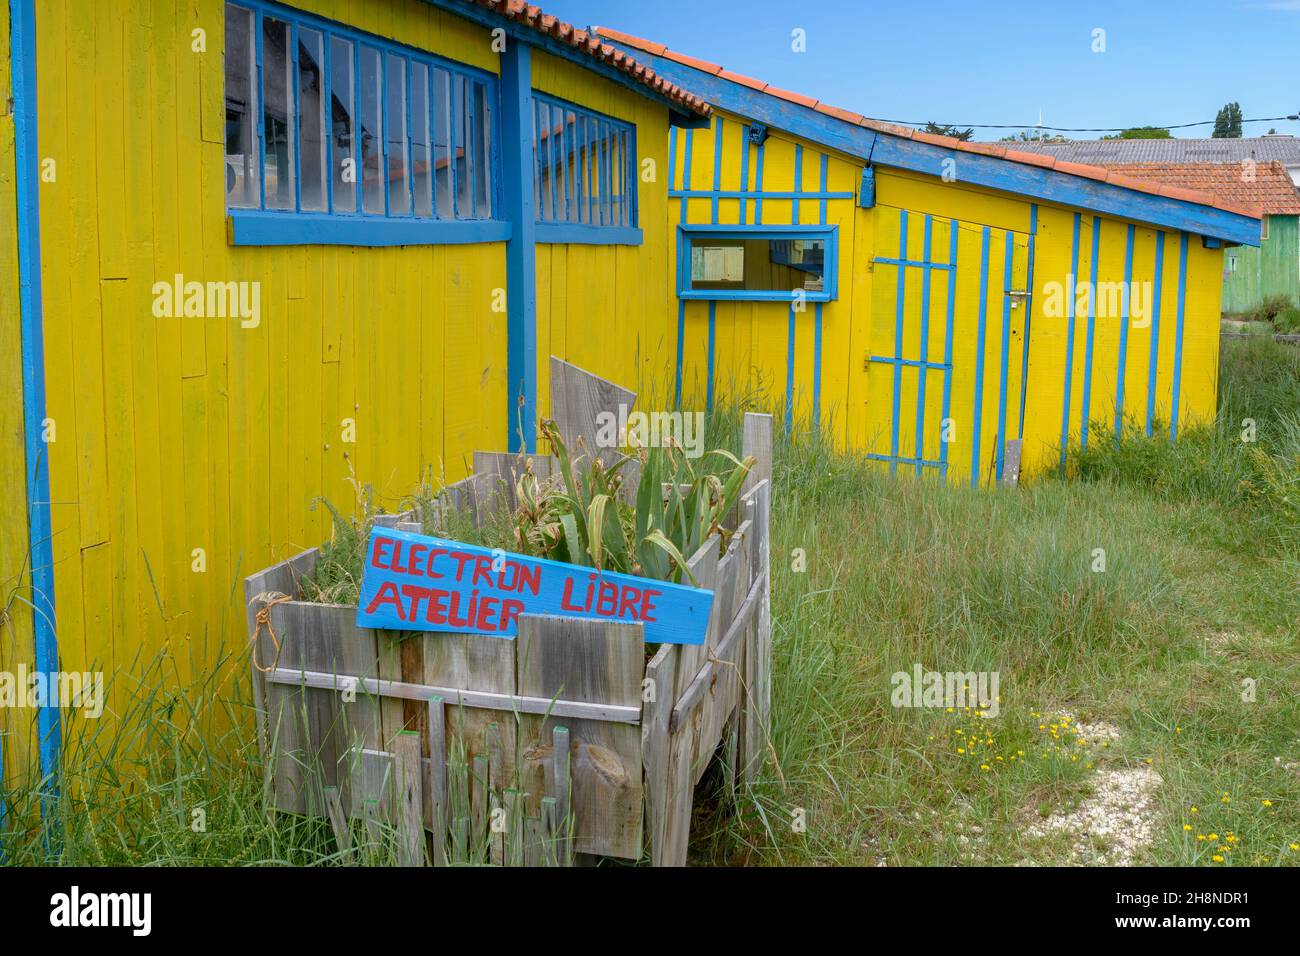 Oleron Island, Charente-Maritime, France - June 7, 2018 : Yellow oyster farming hut now arts and crafts workshop Chateau Oléron Atlantic coast France Stock Photo